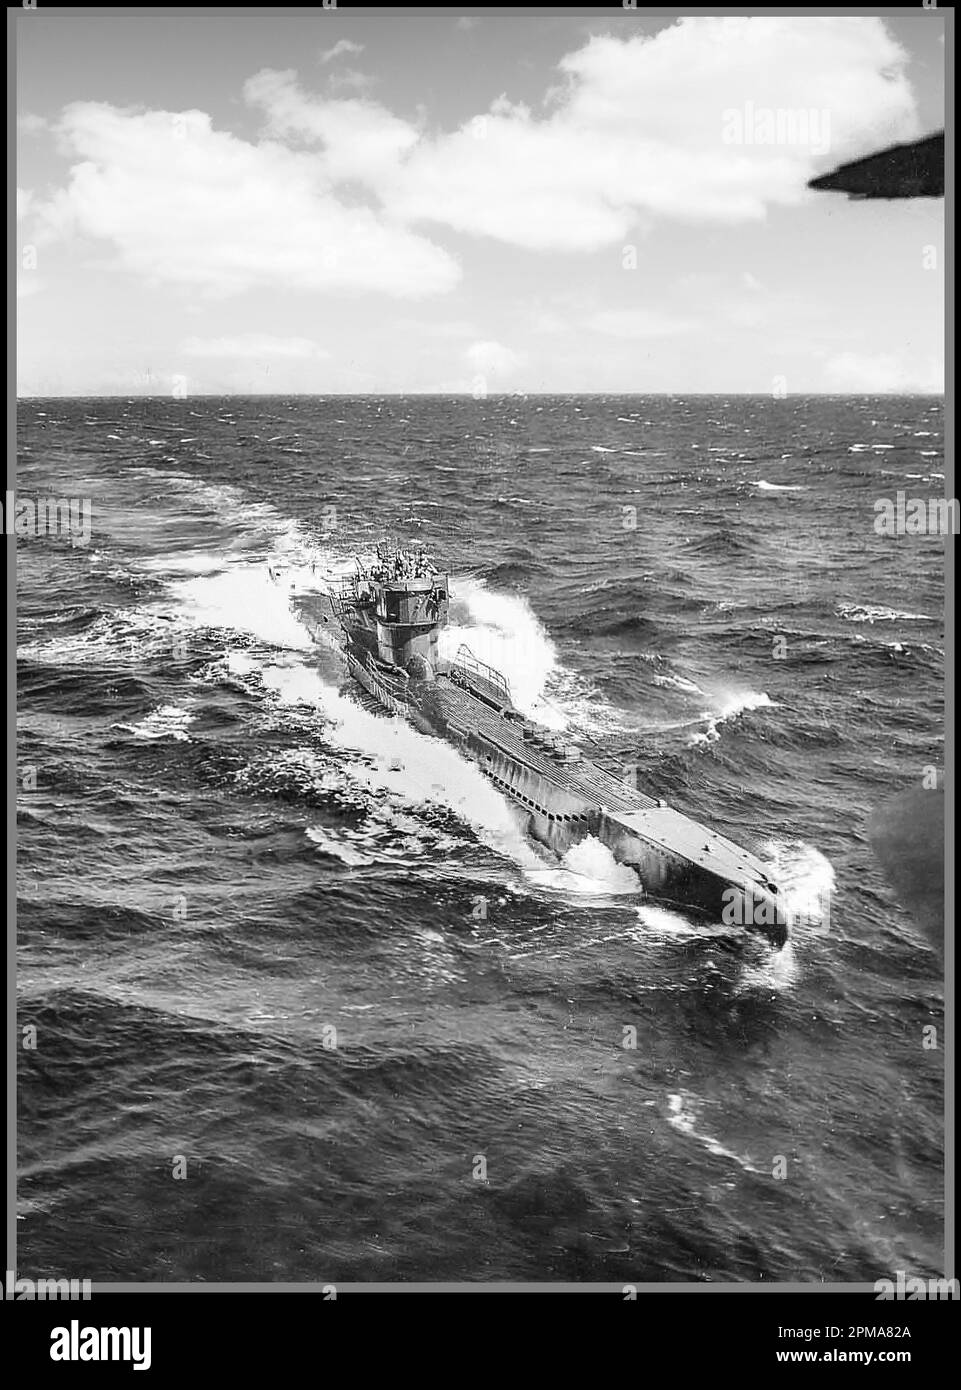 U-BOAT Surrender of Nazi Kriegsmarine German U-boats, WWII. U-249 surrendering on May 9, 1945. U-249 was the first U-boat to surrender after Germany’s surrender. The submarine surrendered to a PB4Y-1 “Liberator” from FAW-7 off Scilly Islands. Official U.S. Navy photograph, Stock Photo